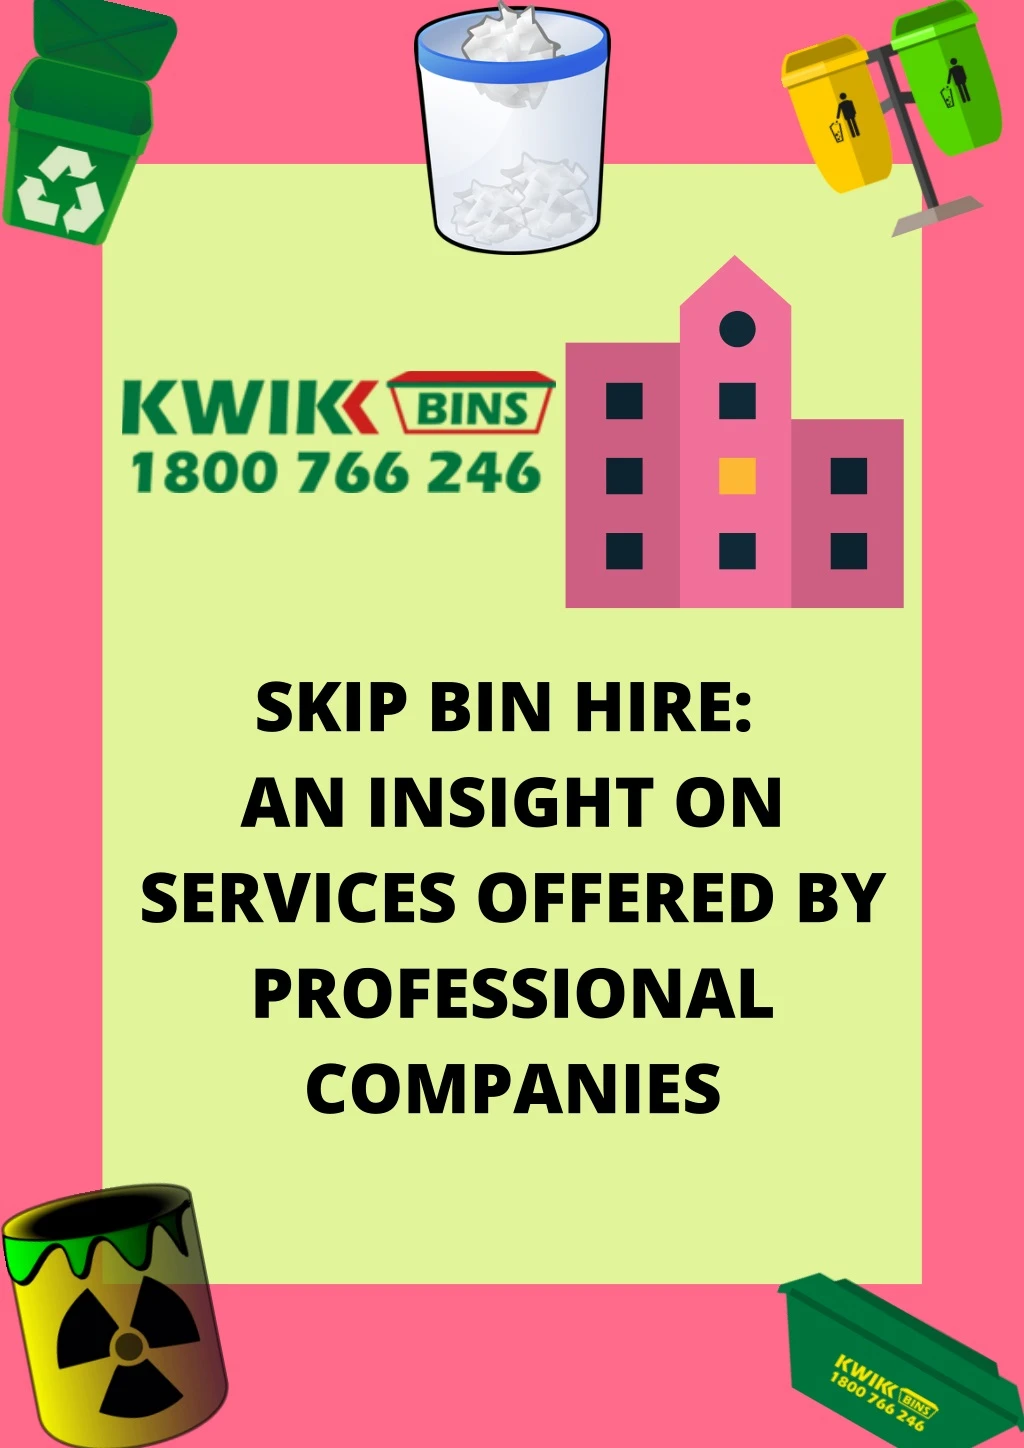 skip bin hire an insight on services offered